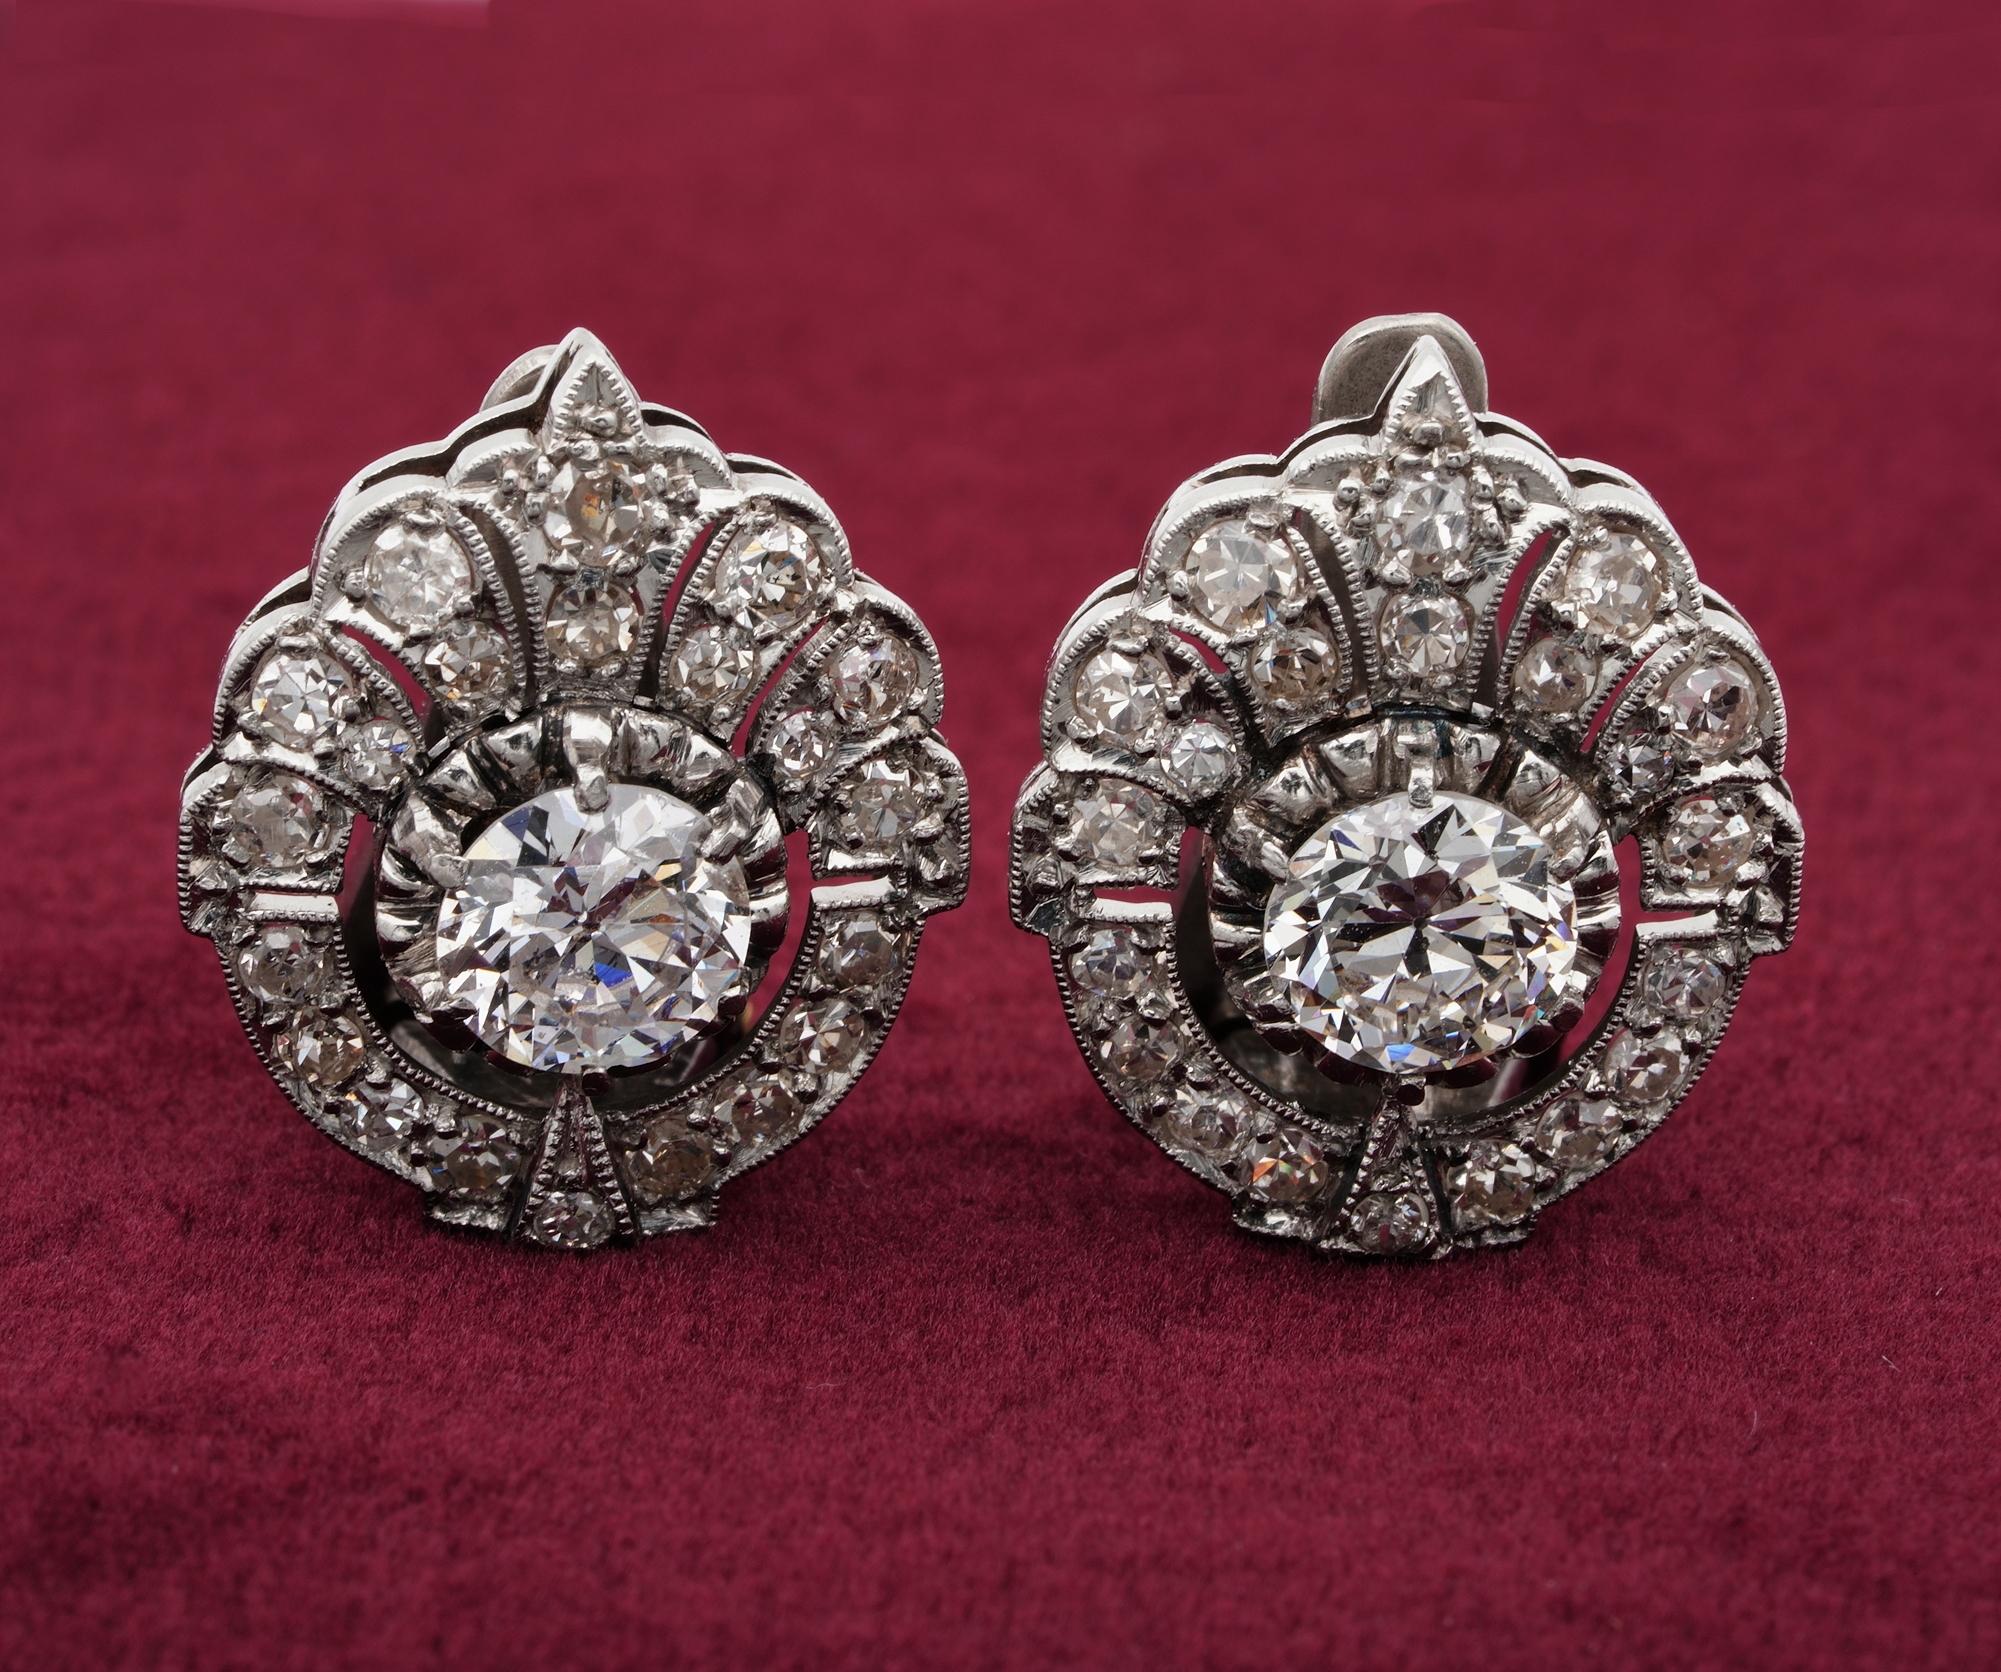 Epitome of Elegance

Art Deco Diamond Platinum earrings with a pin for pierced ears and clip on to stand perfectly on ears
Hand crafted of solid Platinum – tested – during 1930 ca
Marvellous in design, finely hand crafted, genuine antique
They